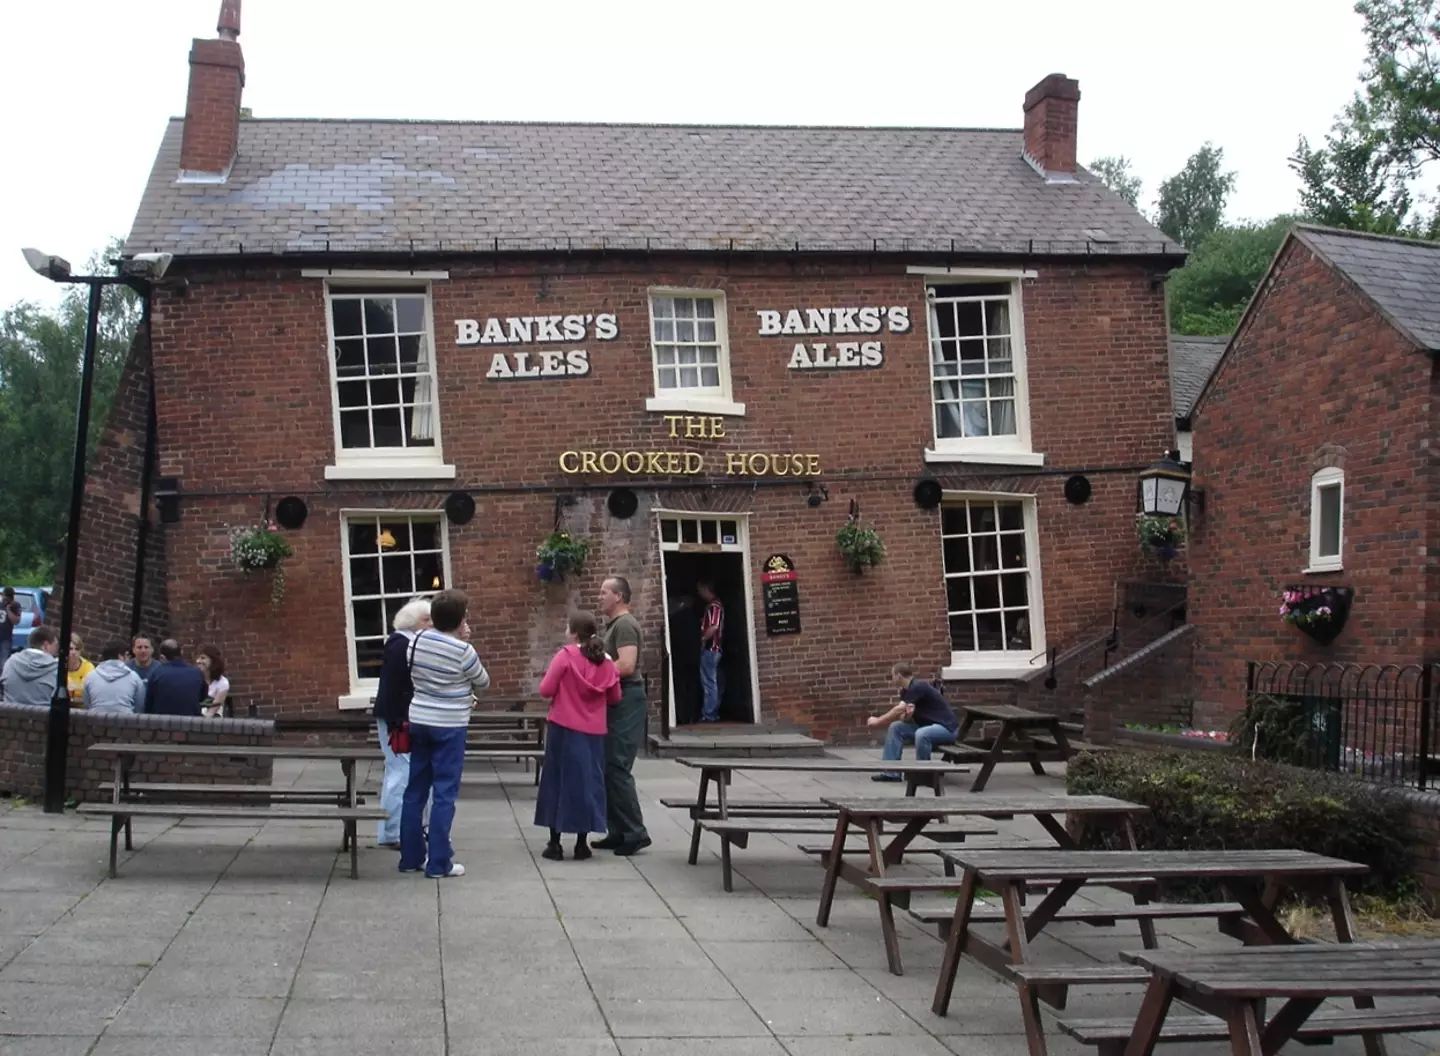 No prizes for guessing why it's called The Crooked House.